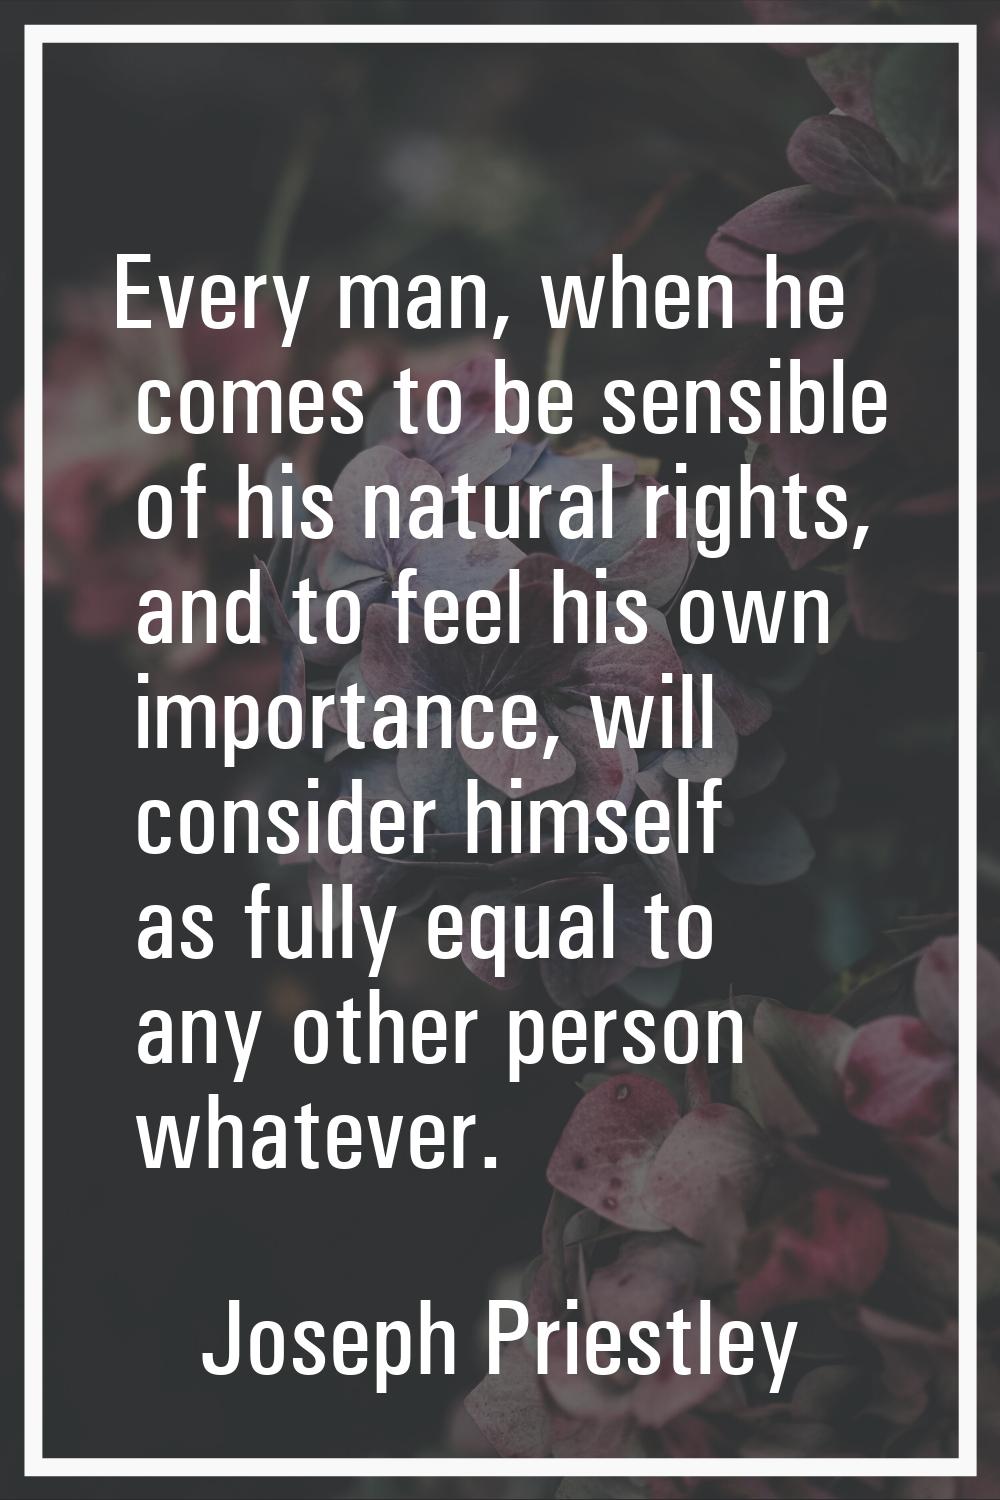 Every man, when he comes to be sensible of his natural rights, and to feel his own importance, will